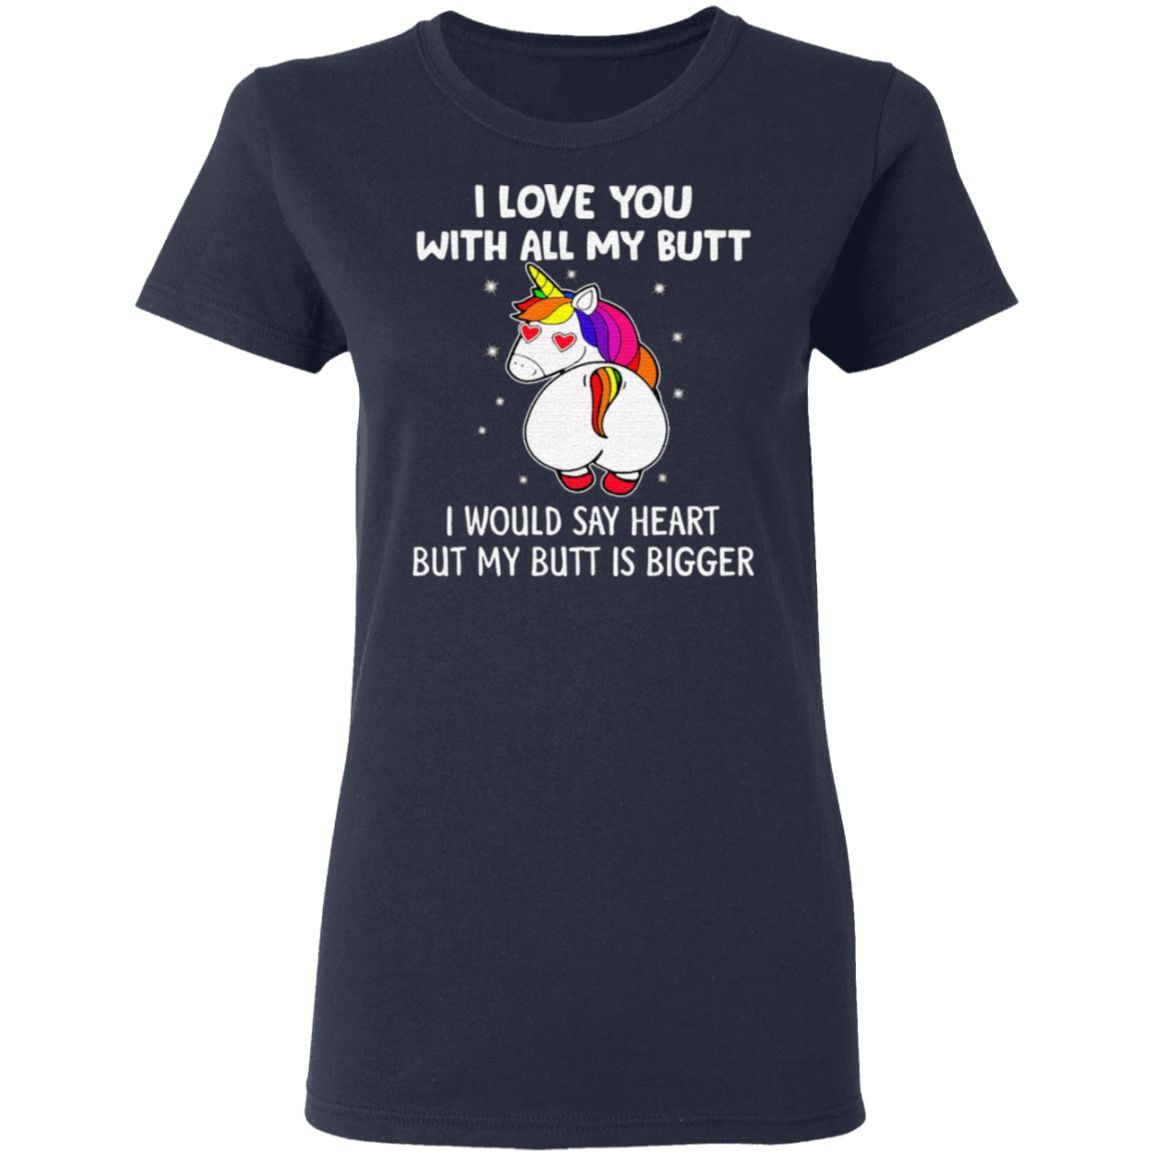 Unicorn I love you with all my butt I would say heart but my butt is bigger t shirt